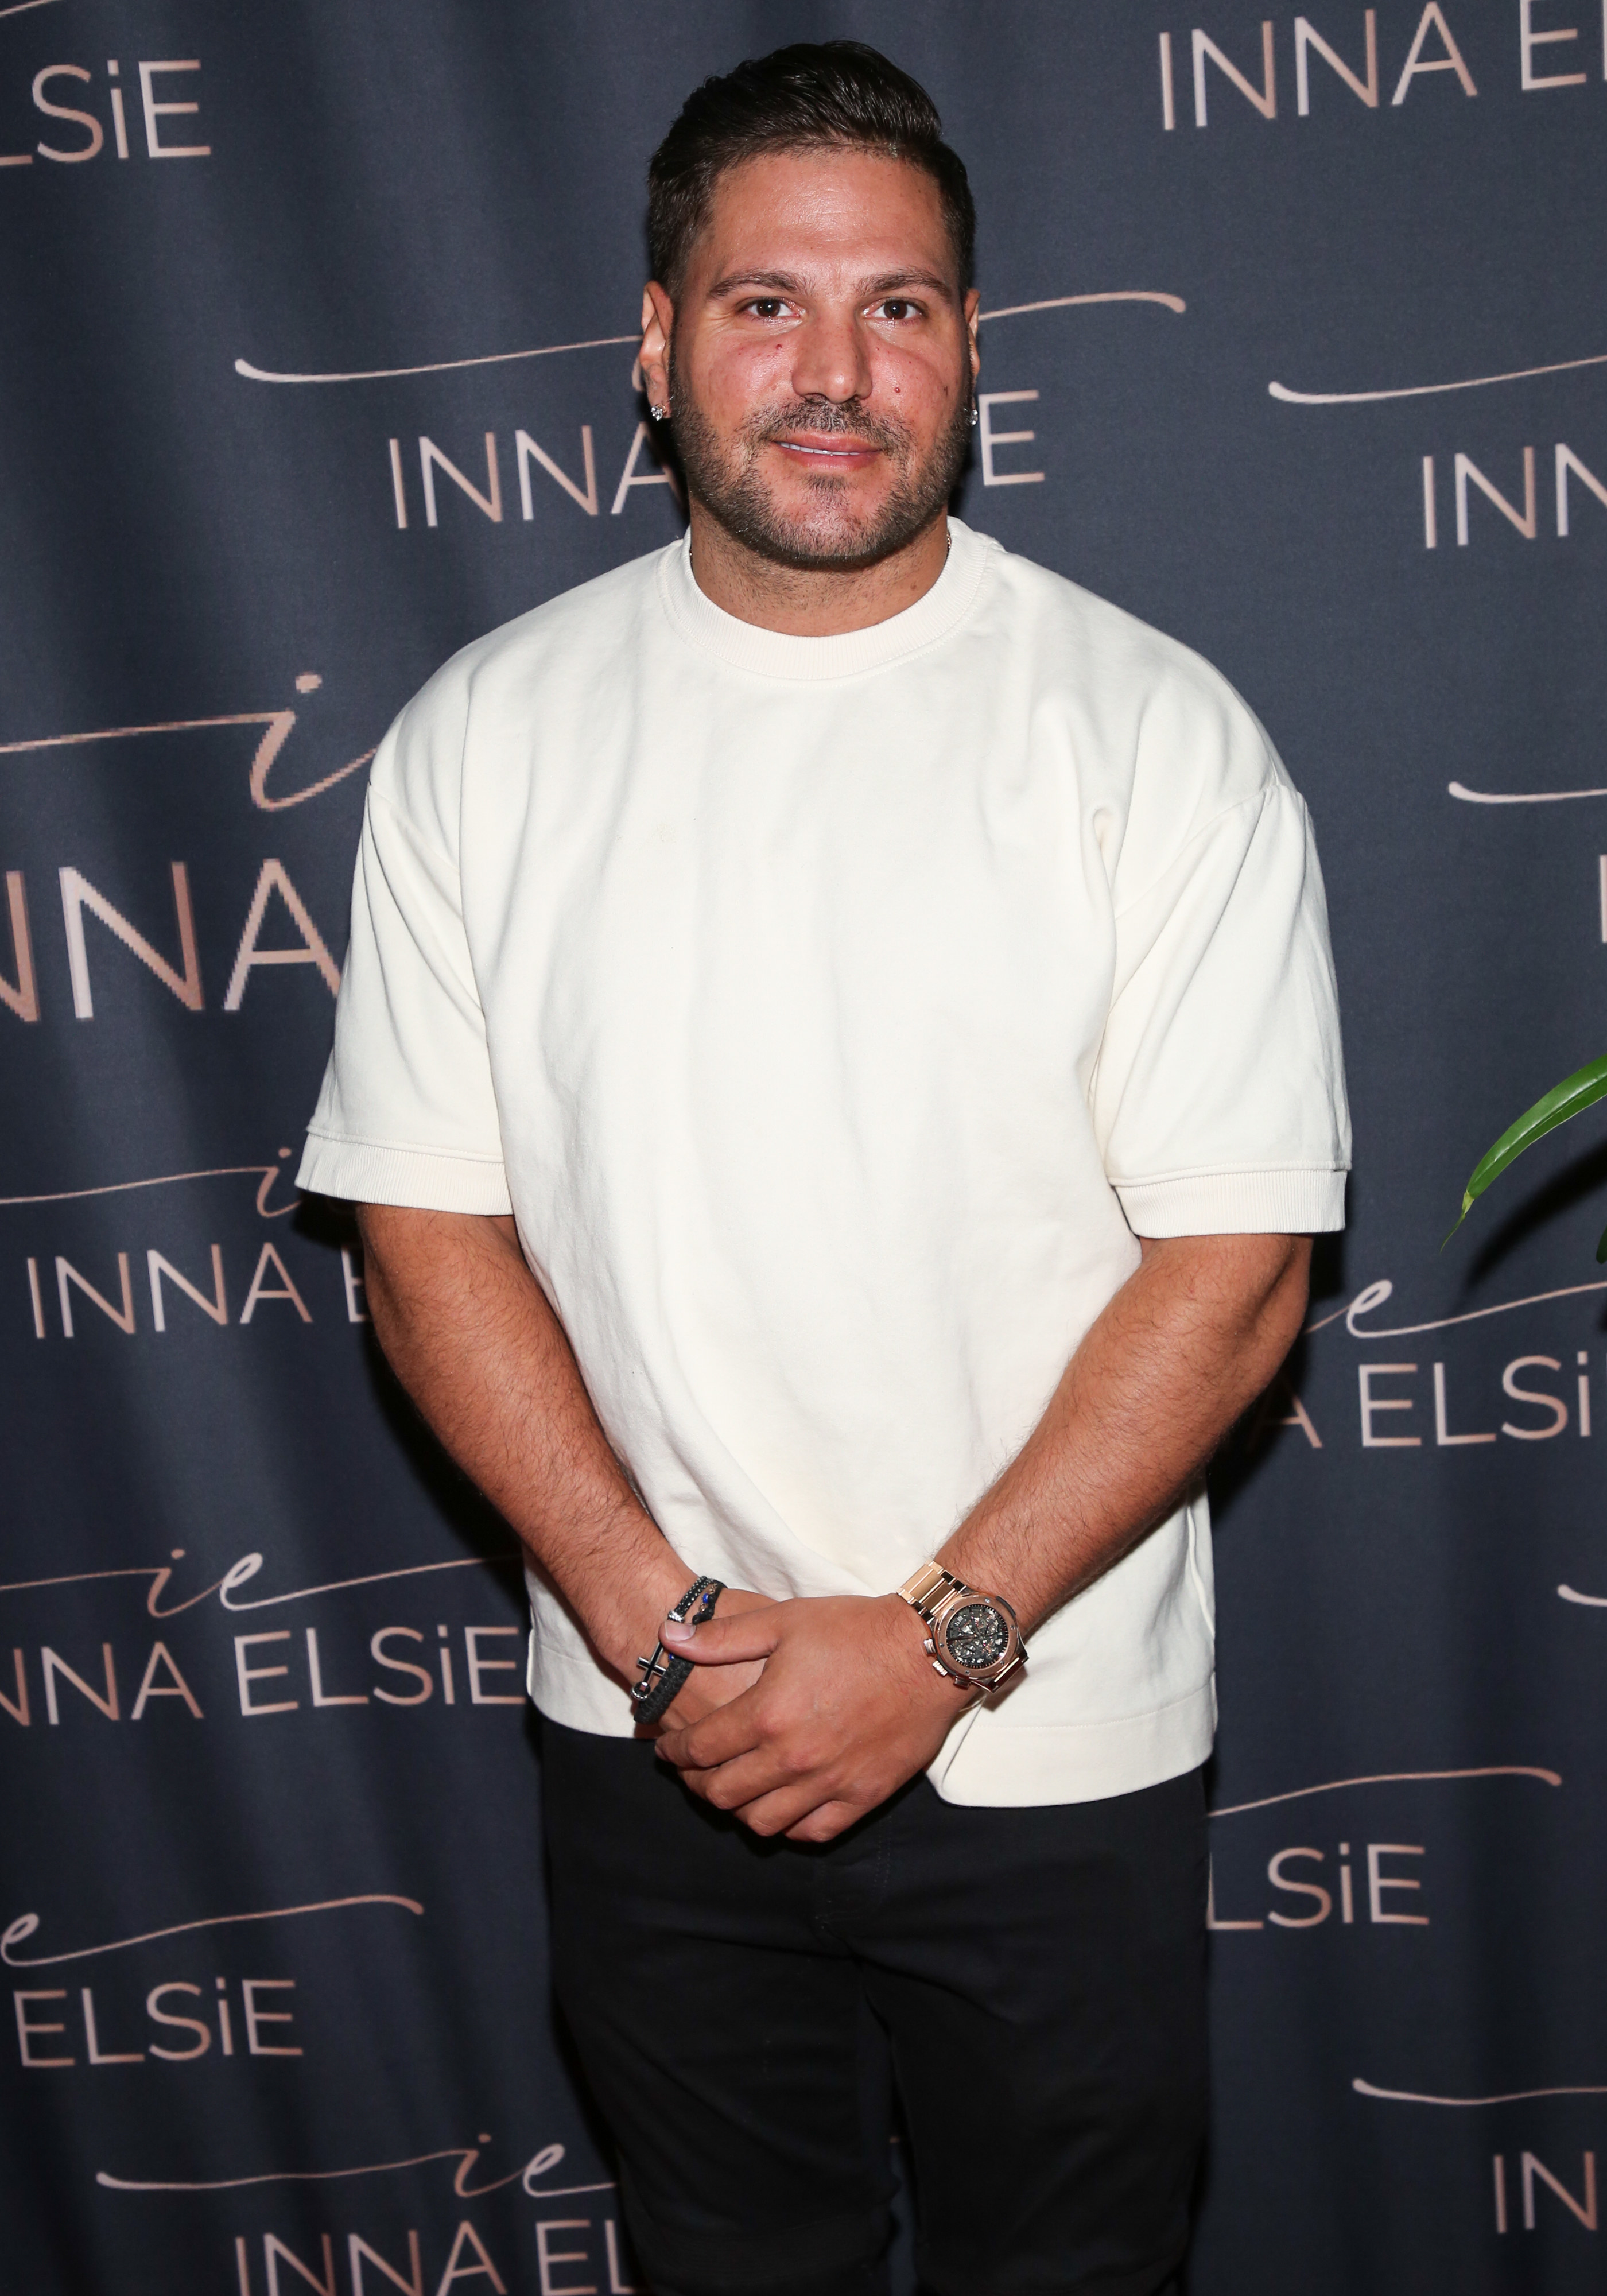 Reality TV Personality Ronnie Ortiz-Magro attends the brand Inna ELSIE new collection &quot;Royaly&quot; launch event at Basbussa on May 03, 2022